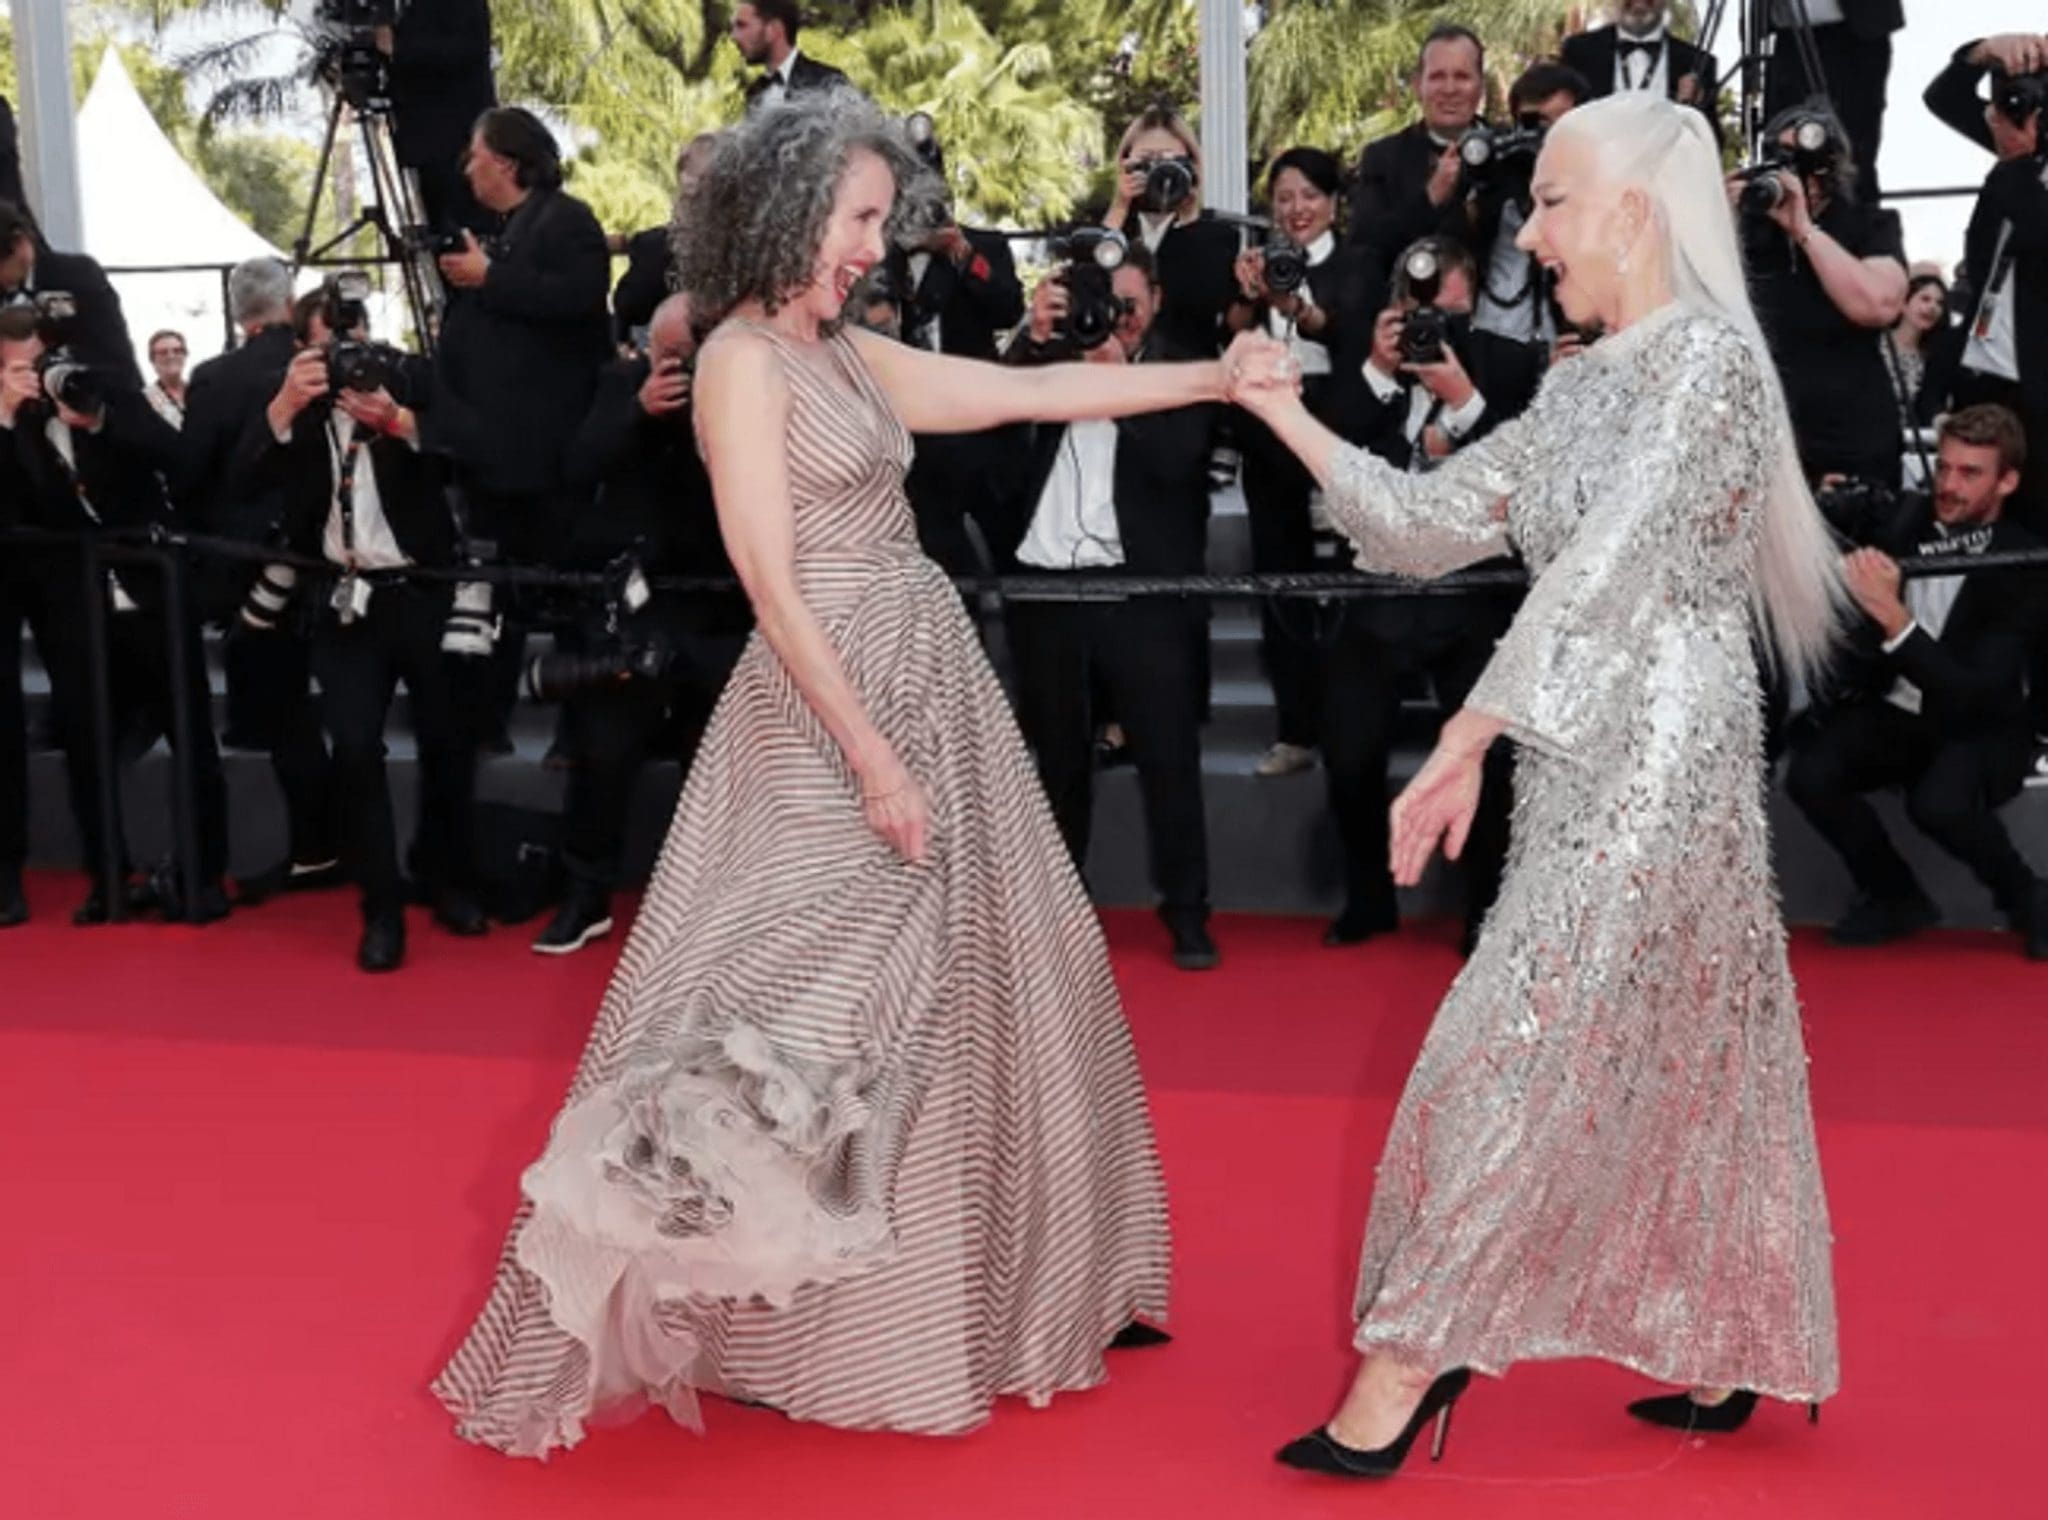 Helen Mirren, 76, and Andie MacDowell, 64, lit up at the premiere of 'Younger Brother' in Cannes